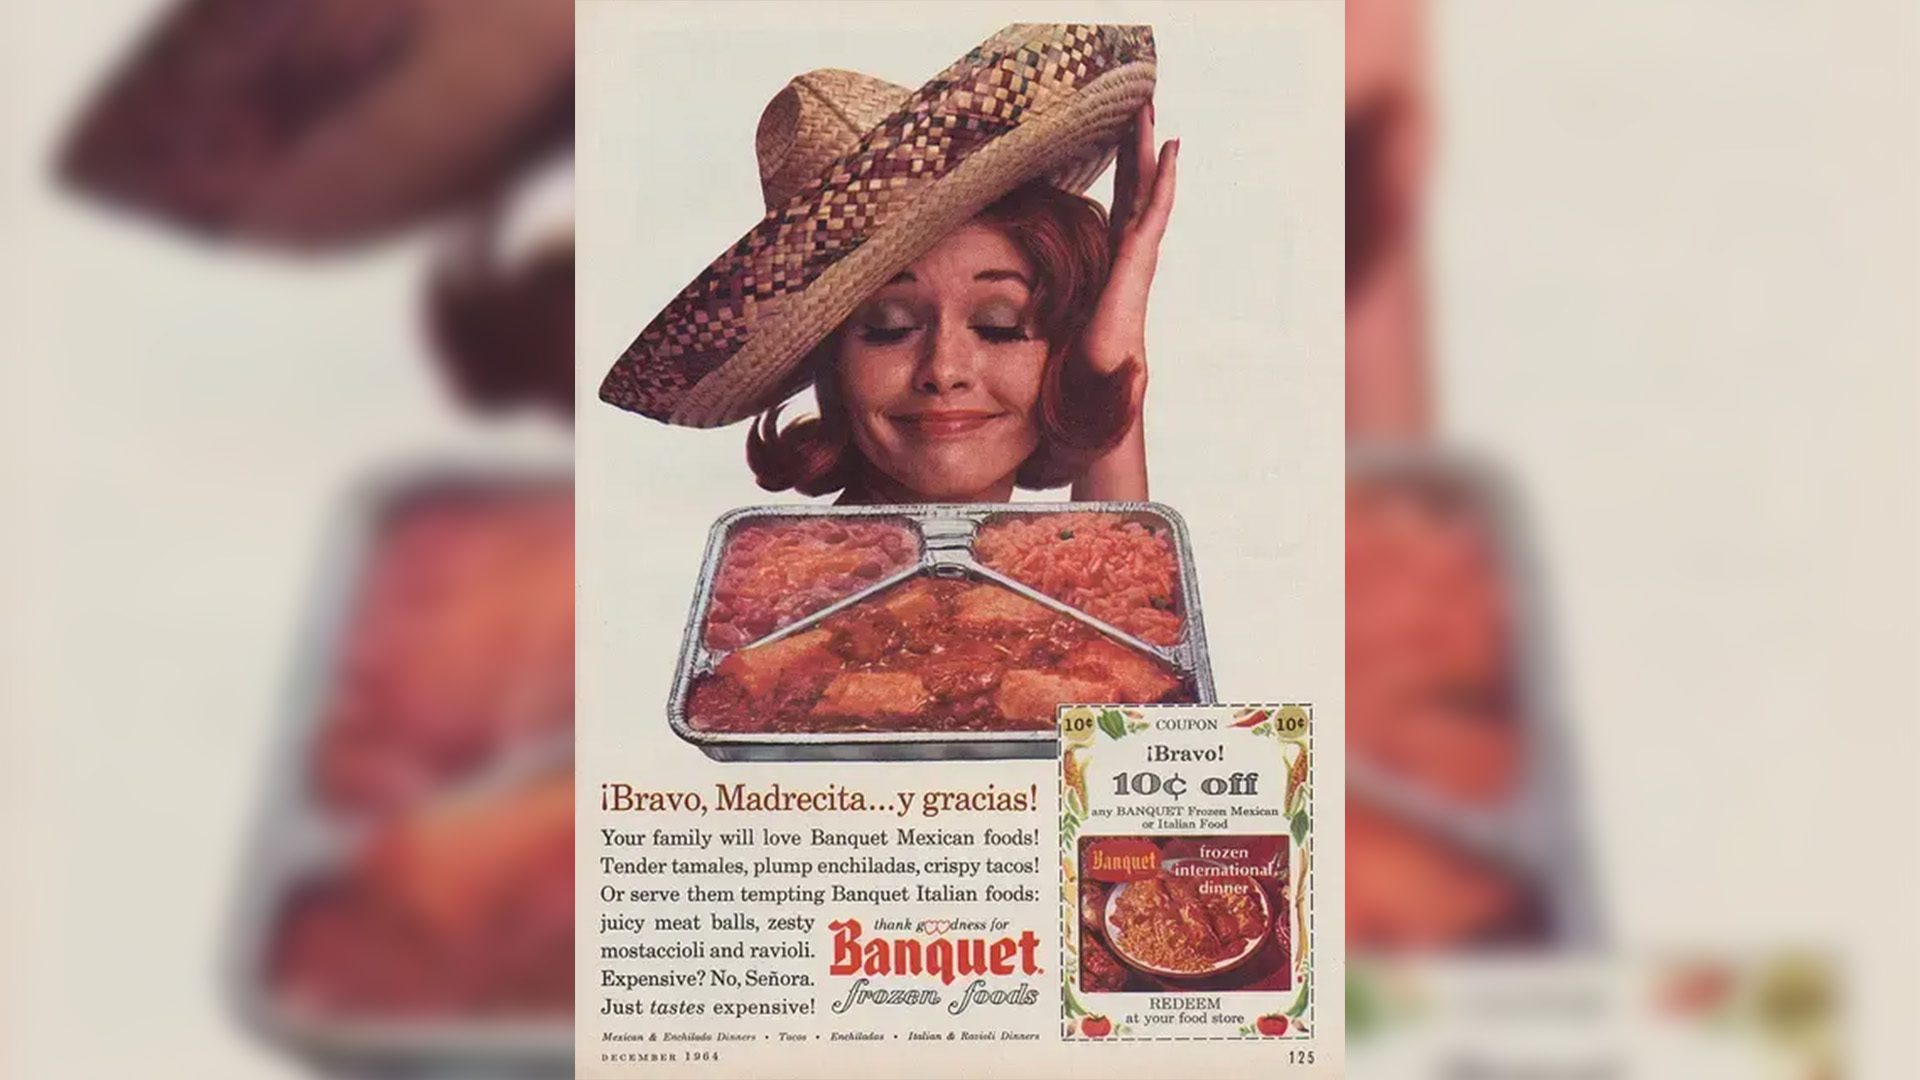 Banquet frozen food ad from 1964